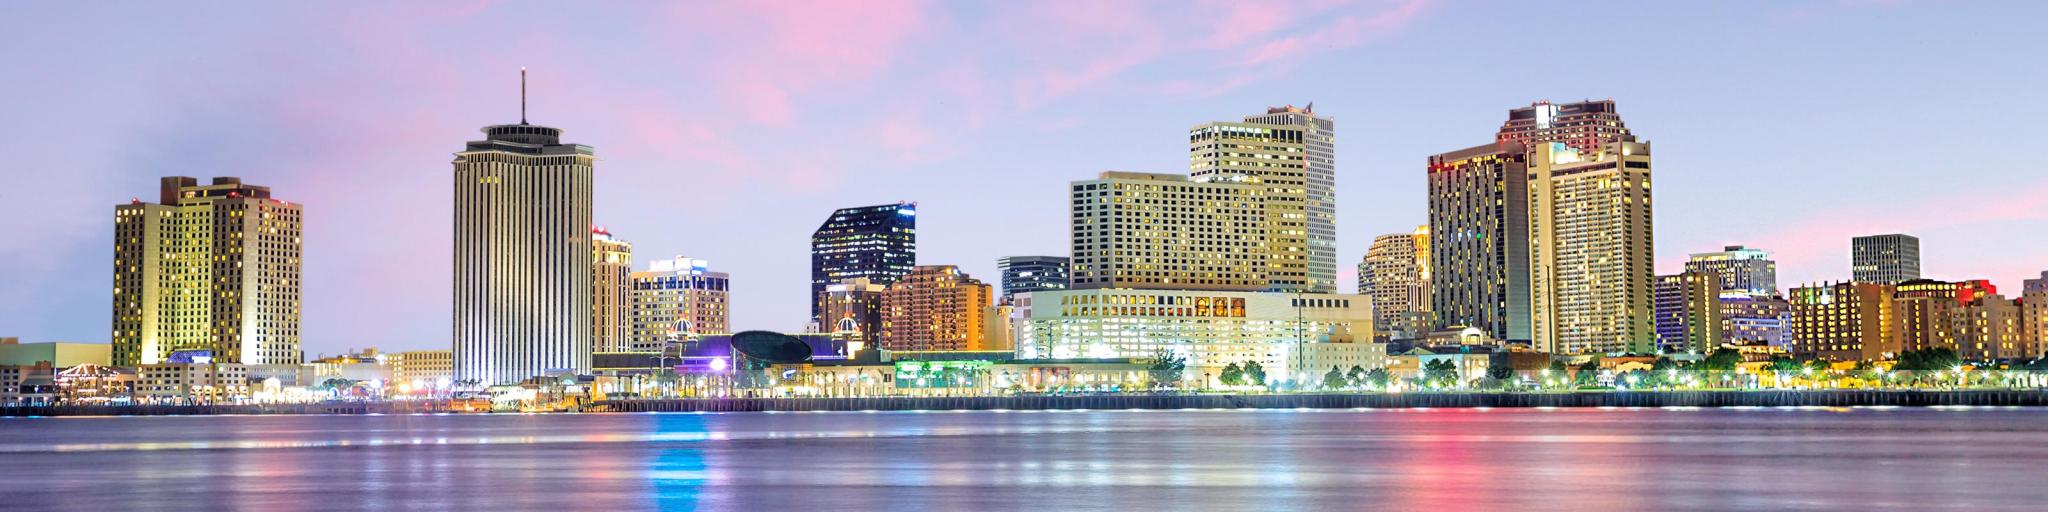 New Orleans, Louisiana with the downtown city in the background and the Mississippi River in the foreground at twilight under a pink sky.